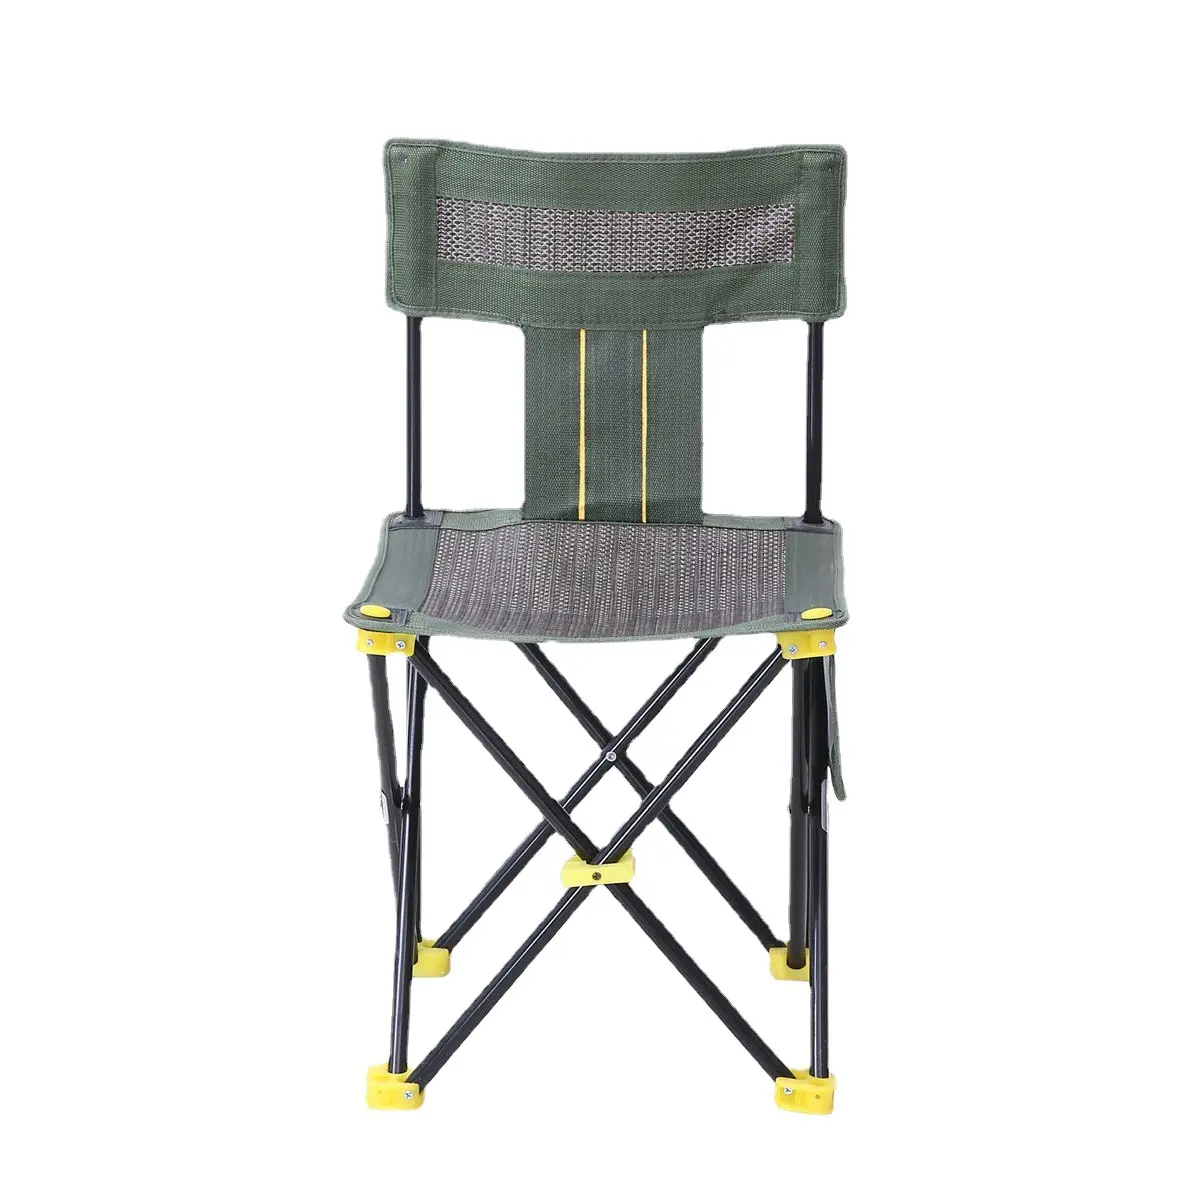 Multi-Functional Outdoor Portable Folding Chair Cool Breathable Beach & Fishing Chair Simple Design Camping Stool